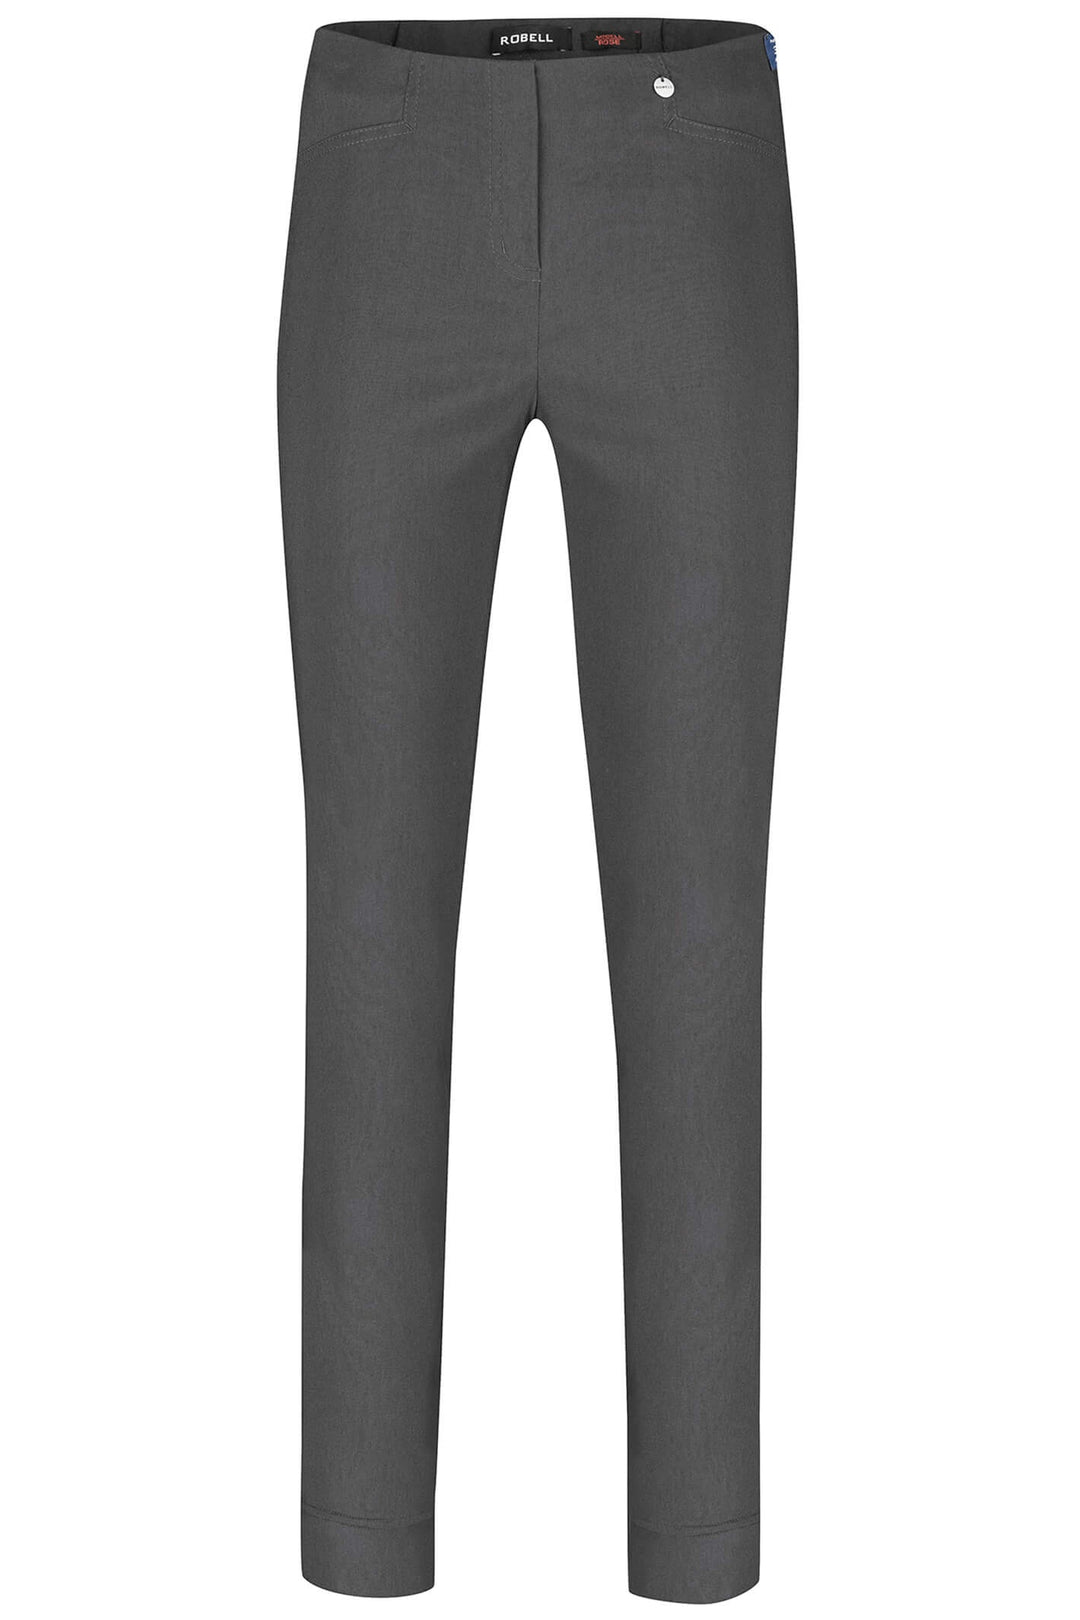 Robell 51673-5499-97 Rose Charcoal Full Length Slim Fit Trousers - Dotique